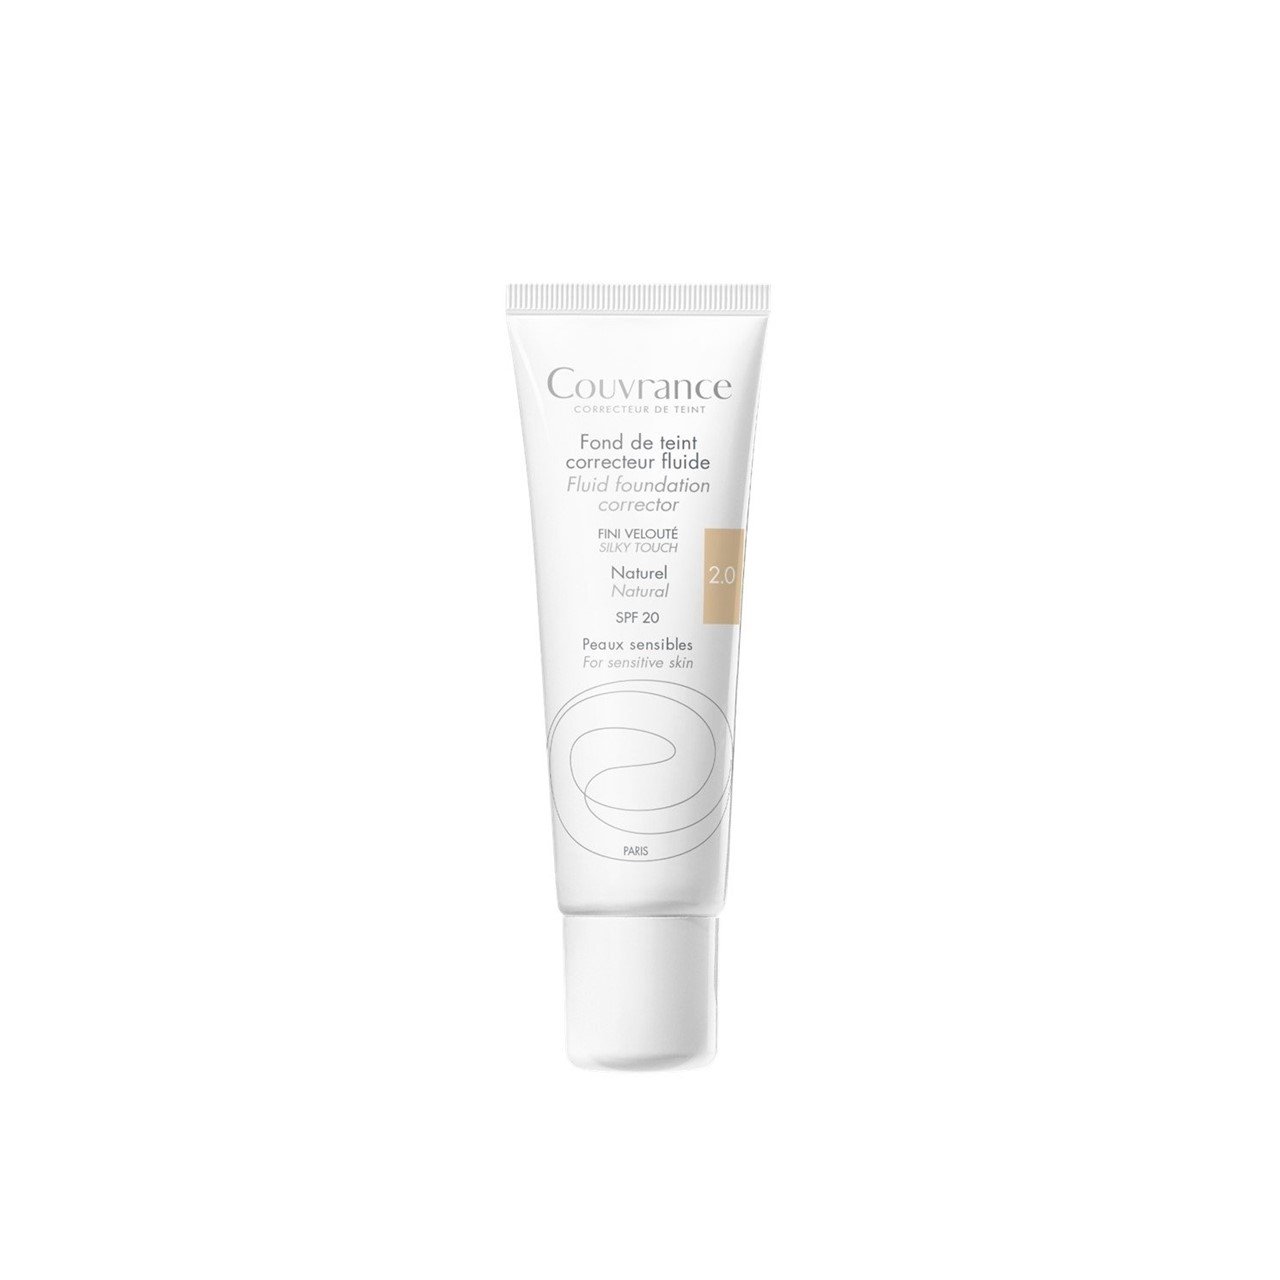 Buy Avène Couvrance Fluid Foundation Corrector 2.0 Natural · World Wide